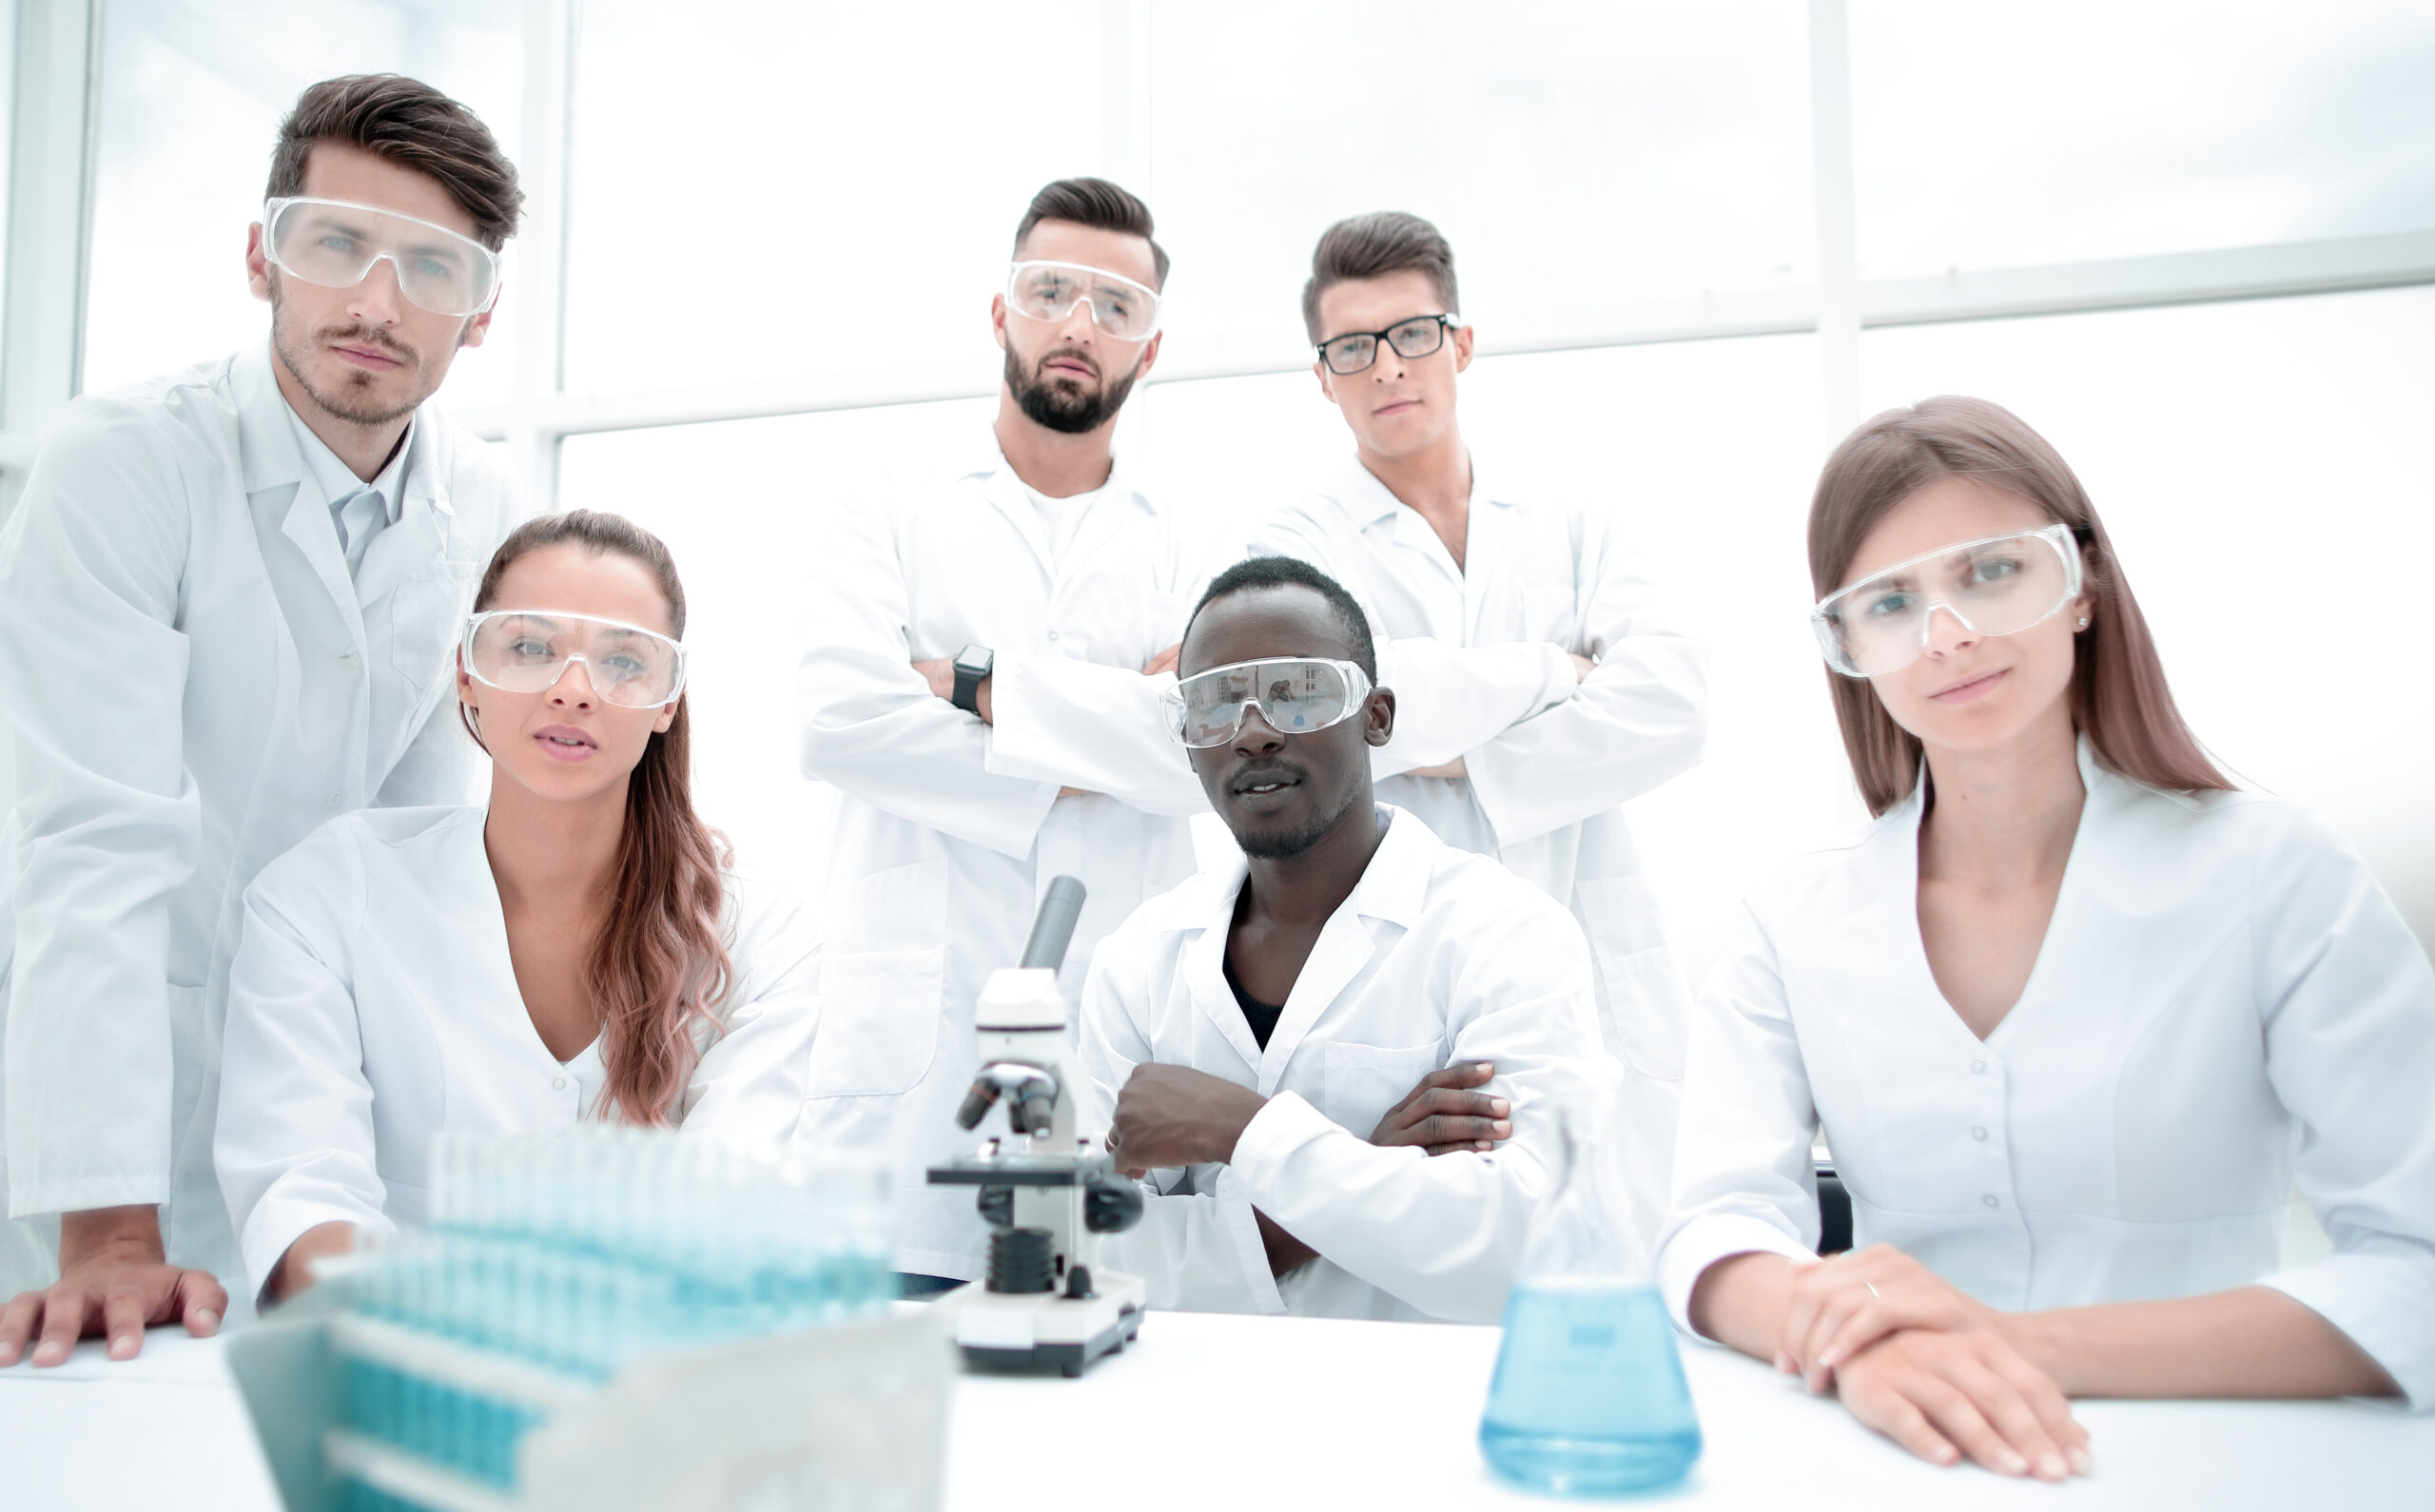 group-young-successful-scientists-posing-camera-scaled